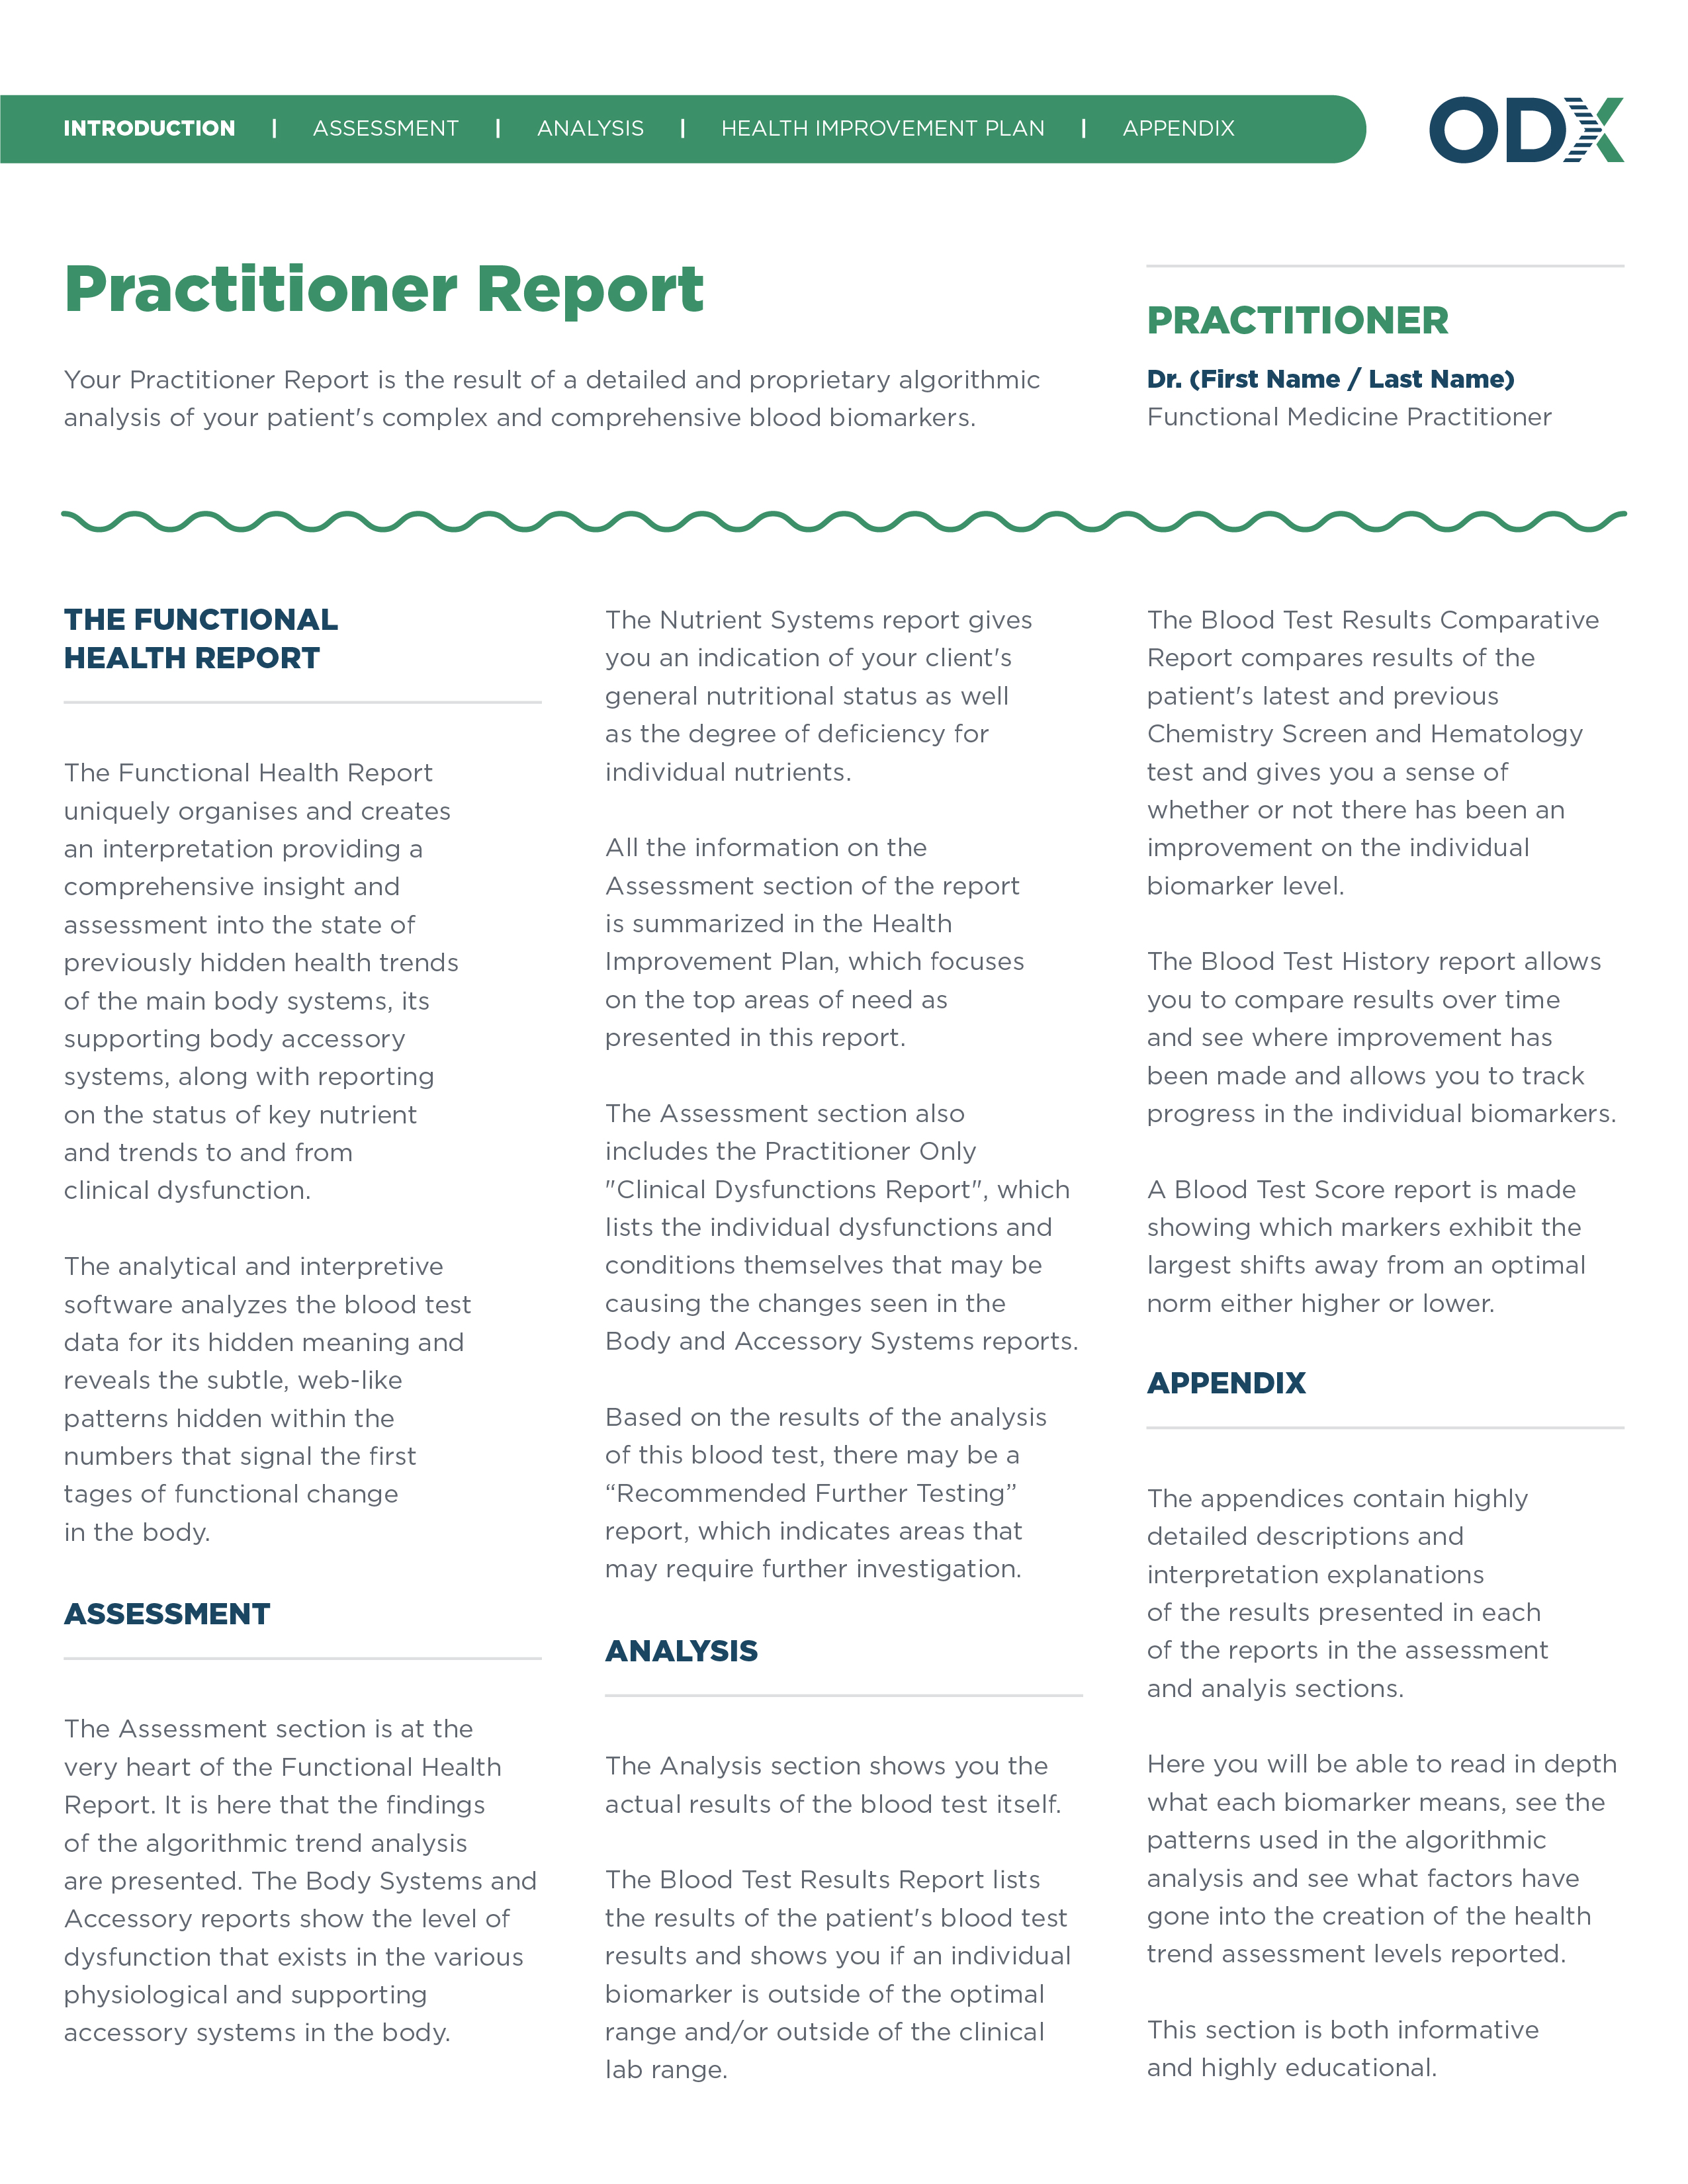 All Report Design for New Site_Practitioner Report-